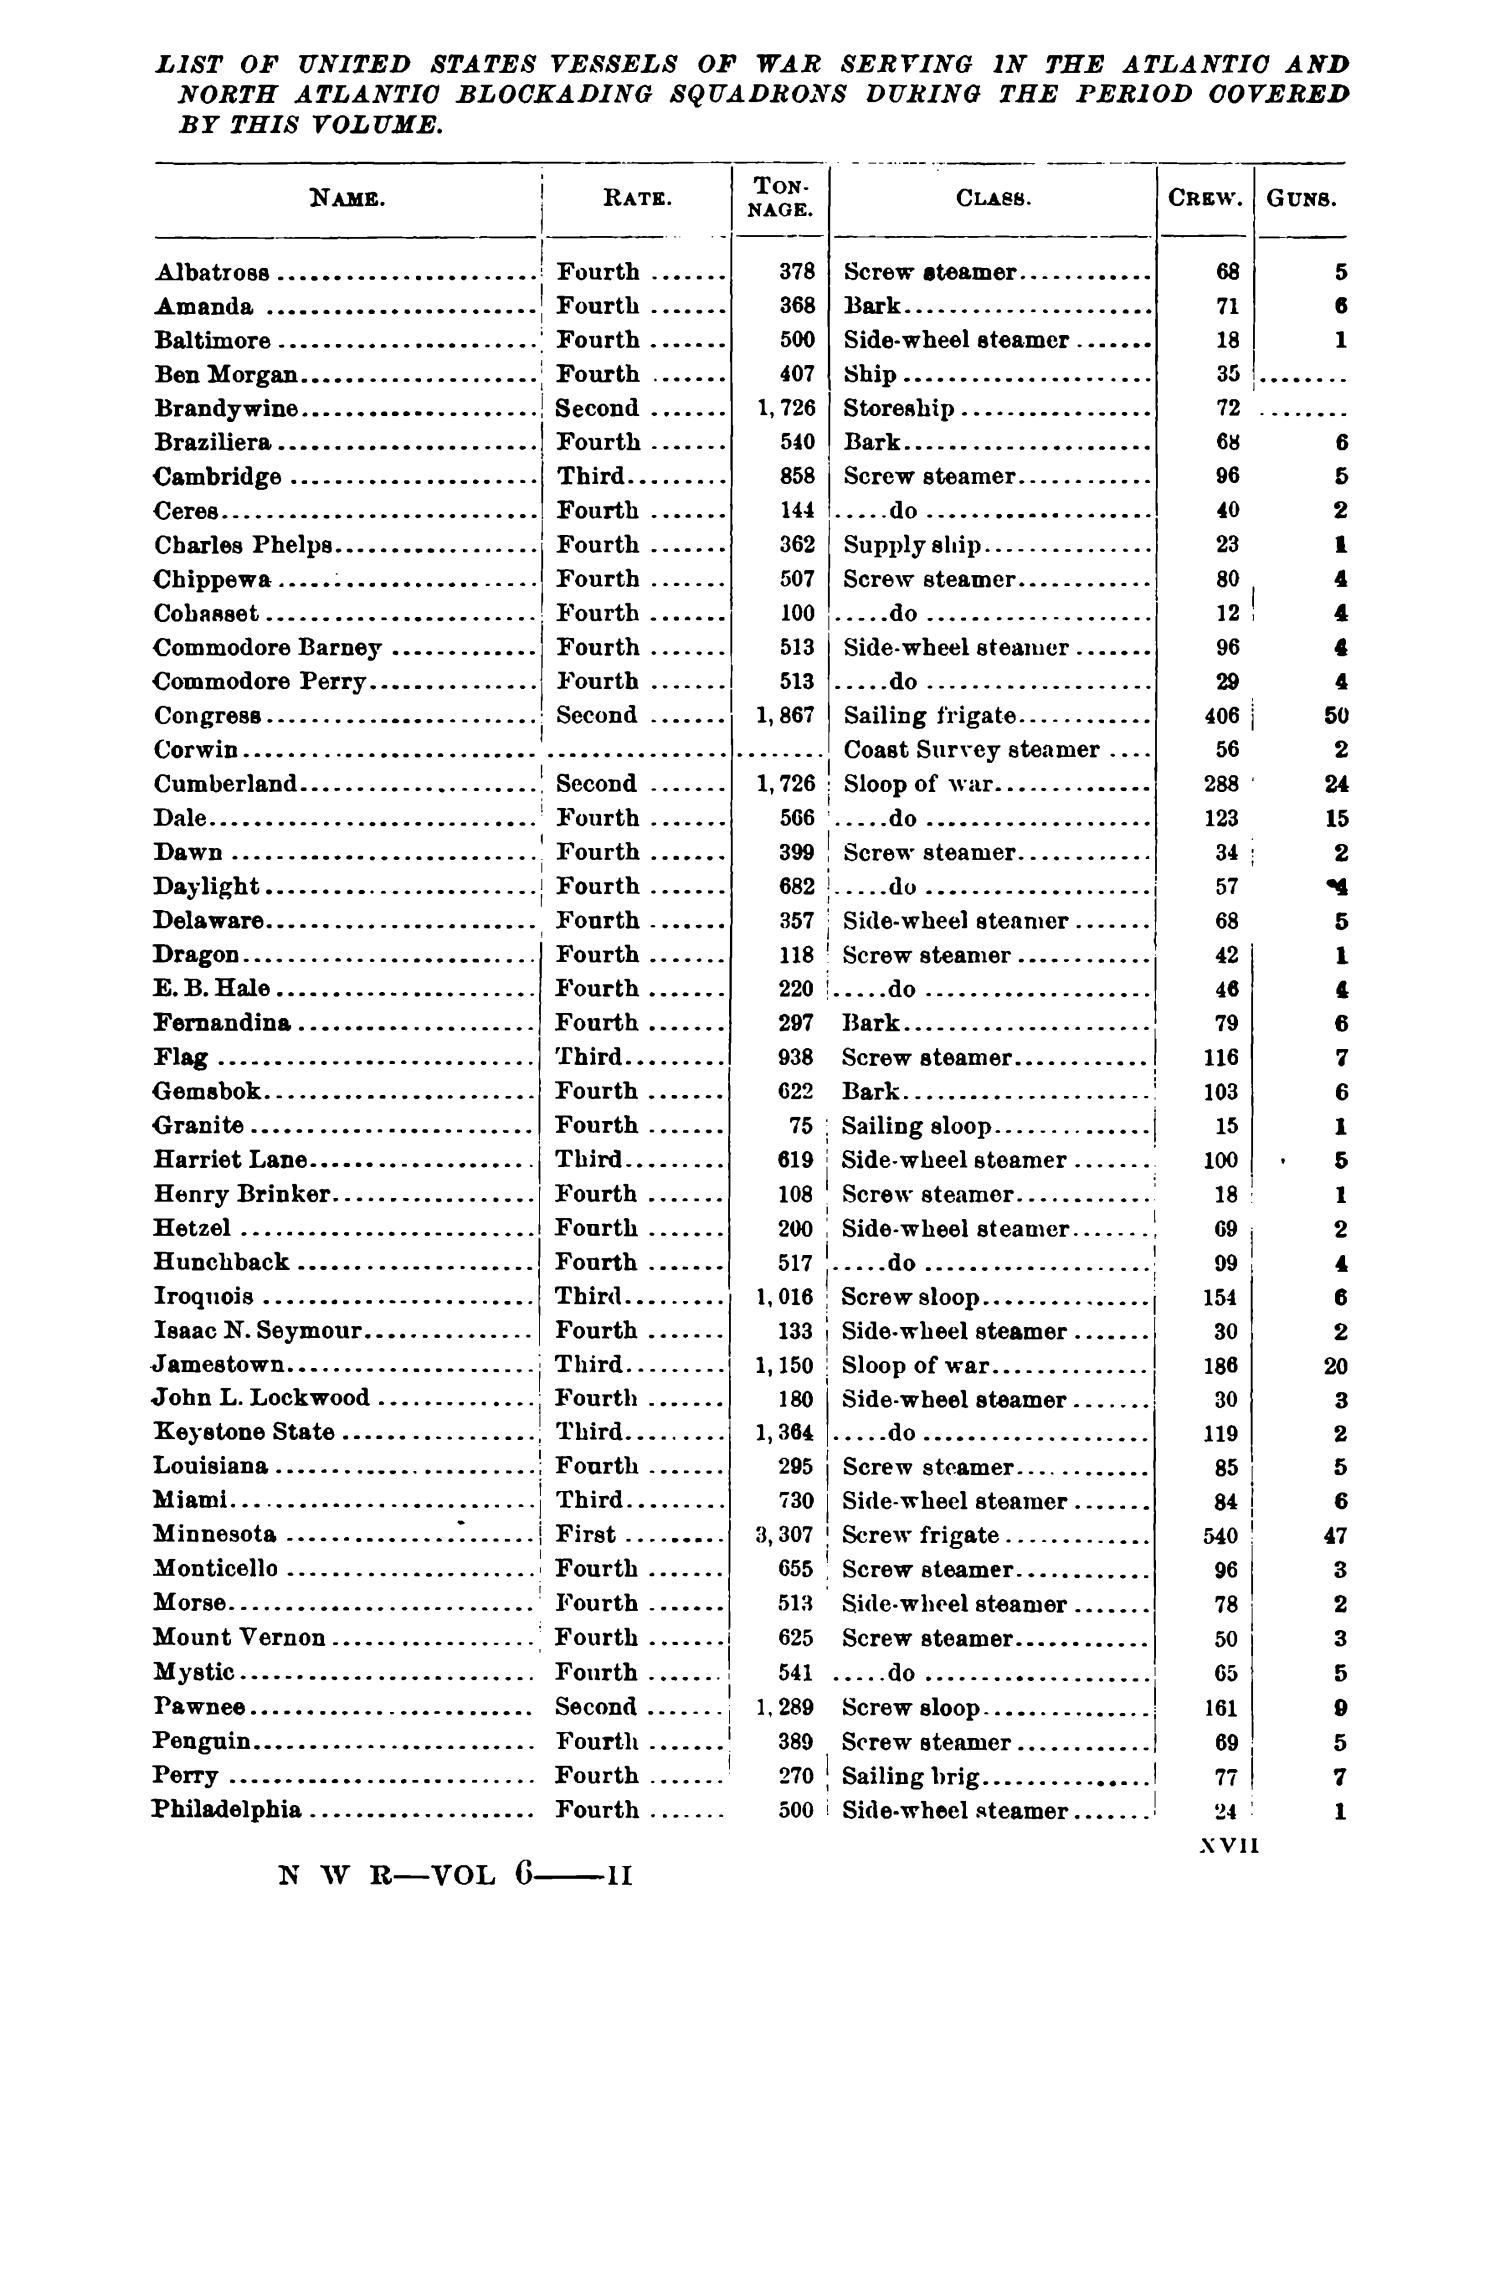 Official Records of the Union and Confederate Navies in the War of the Rebellion. Series 1, Volume 6.
                                                
                                                    XVII
                                                